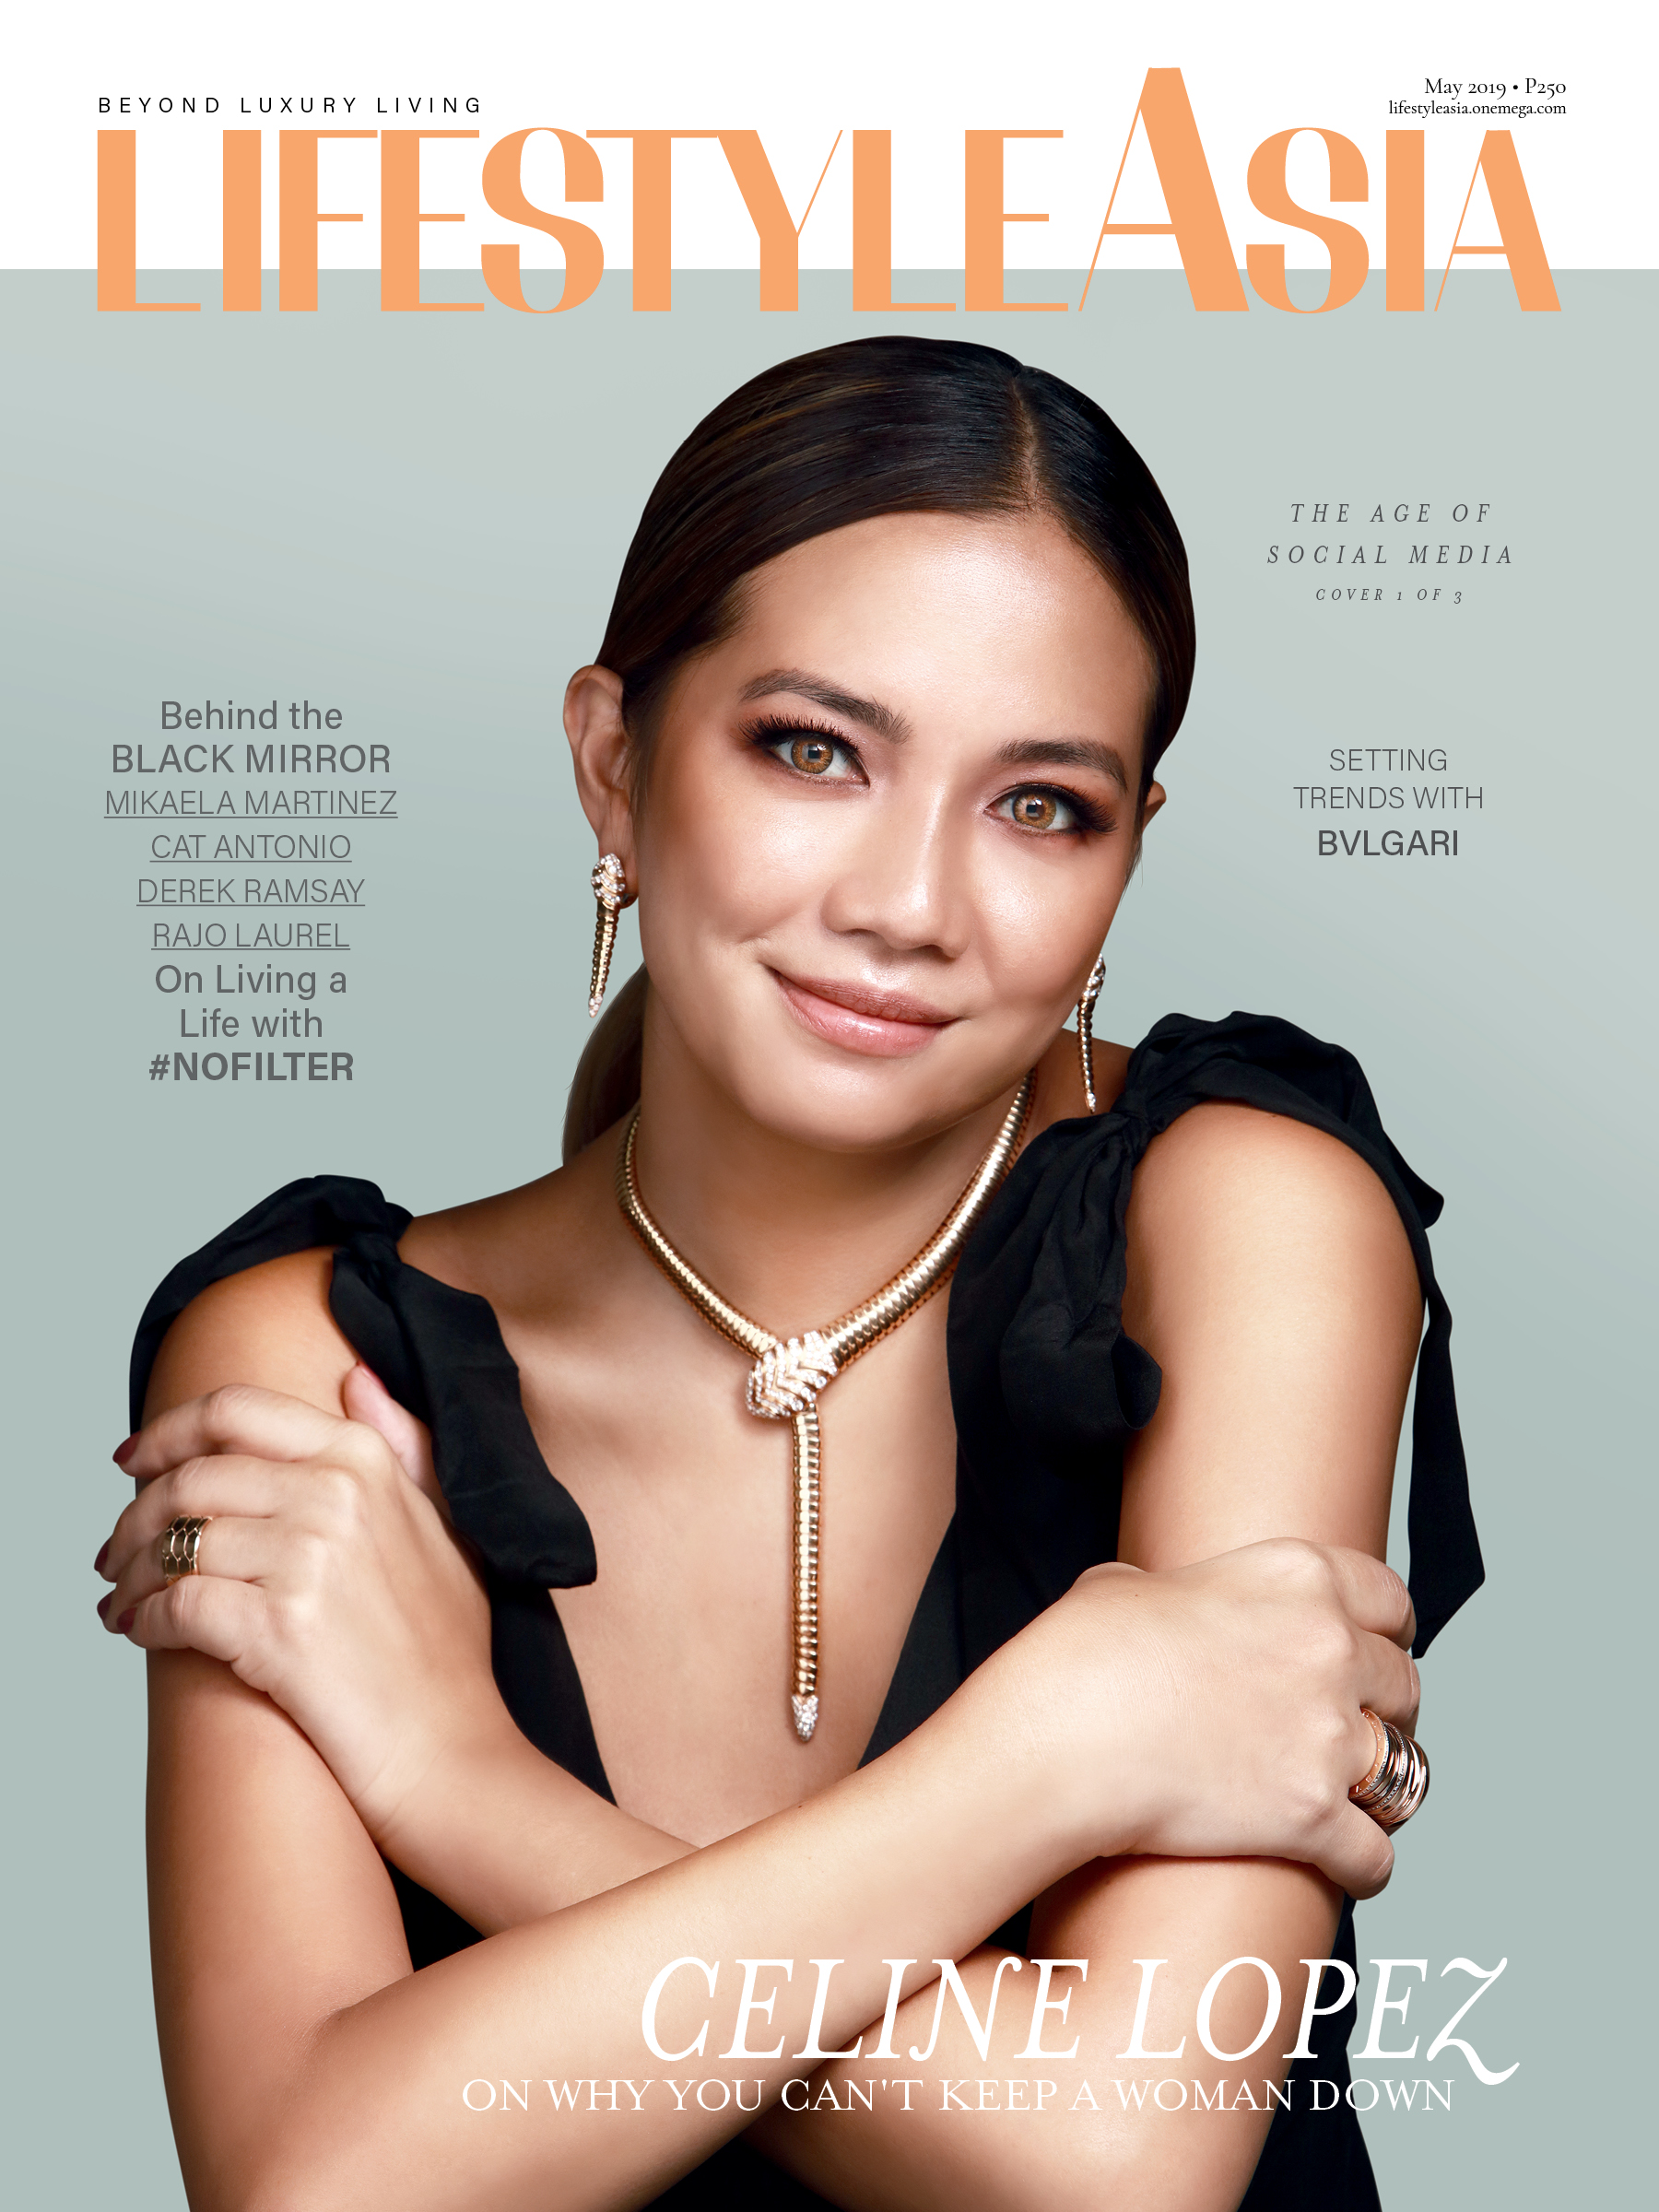 Celine Lopez on Lifestyle Asia May 2019 cover